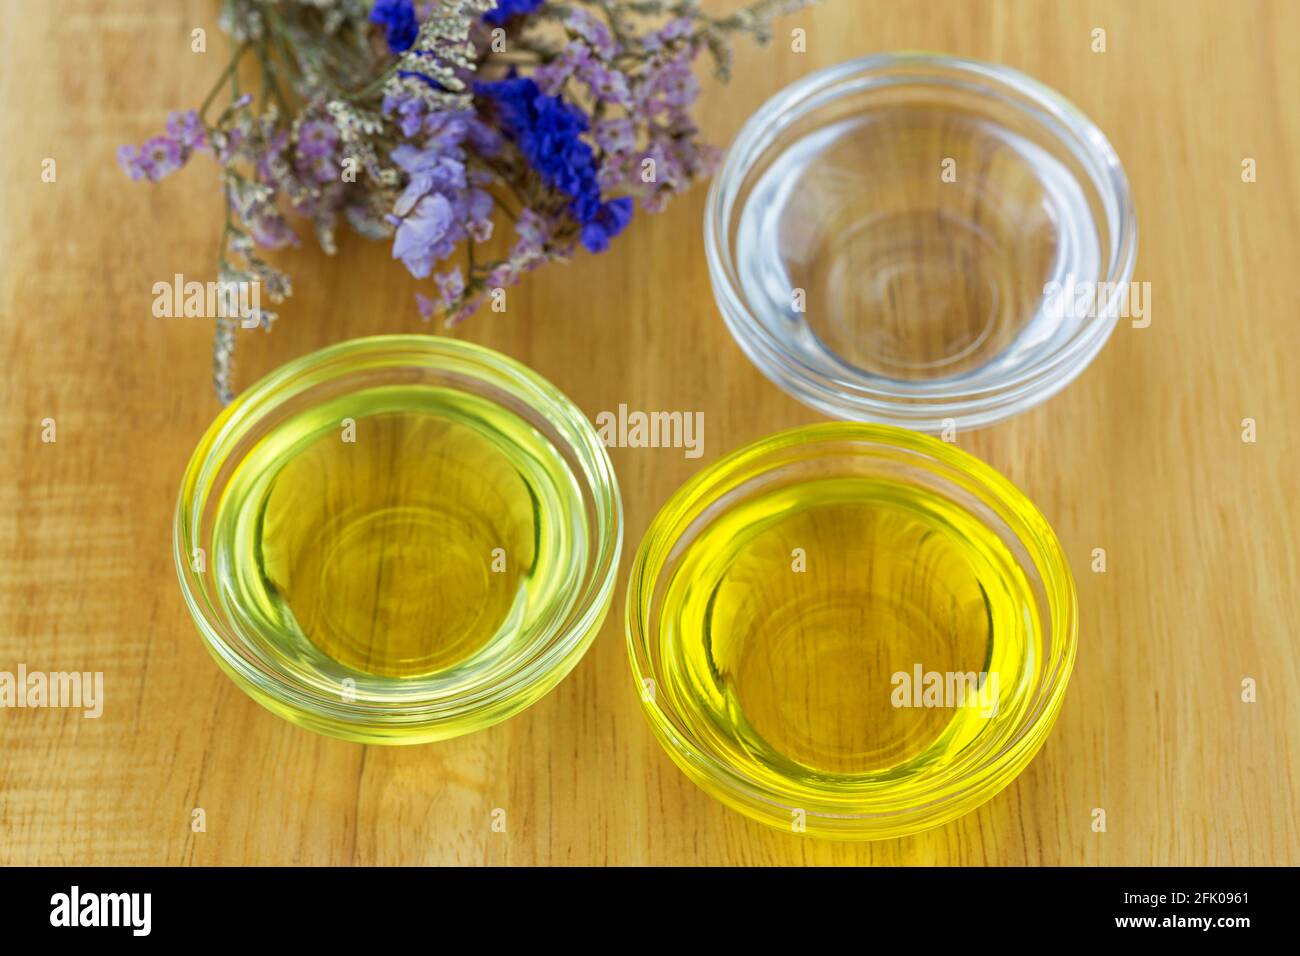 Bowl of different organic oil - cold pressed Coconut oil, Jojoba Oil, Caster oil to make homemade skin beauty product Stock Photo